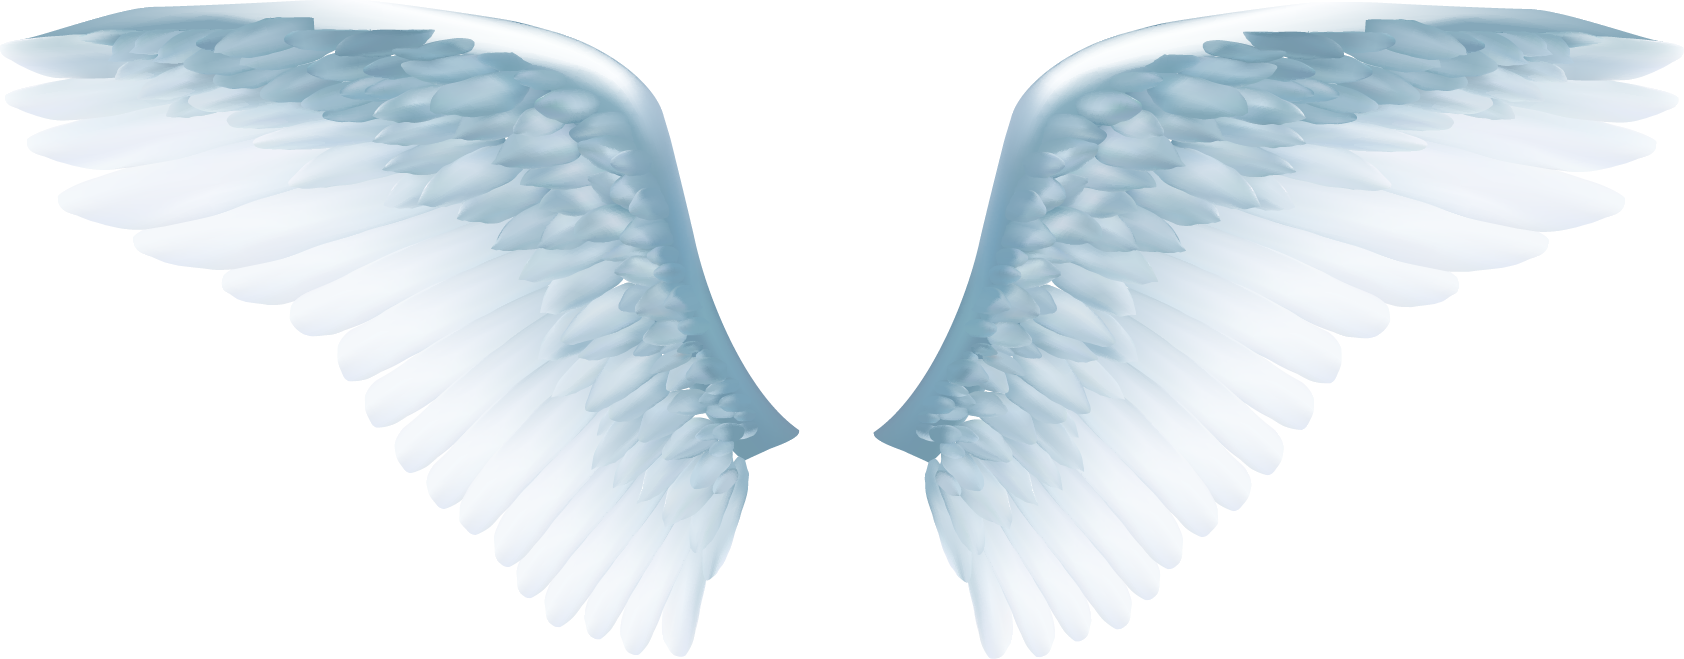 angel-wing-icon-exquisite-white-angel-wings-png-download-1684-659